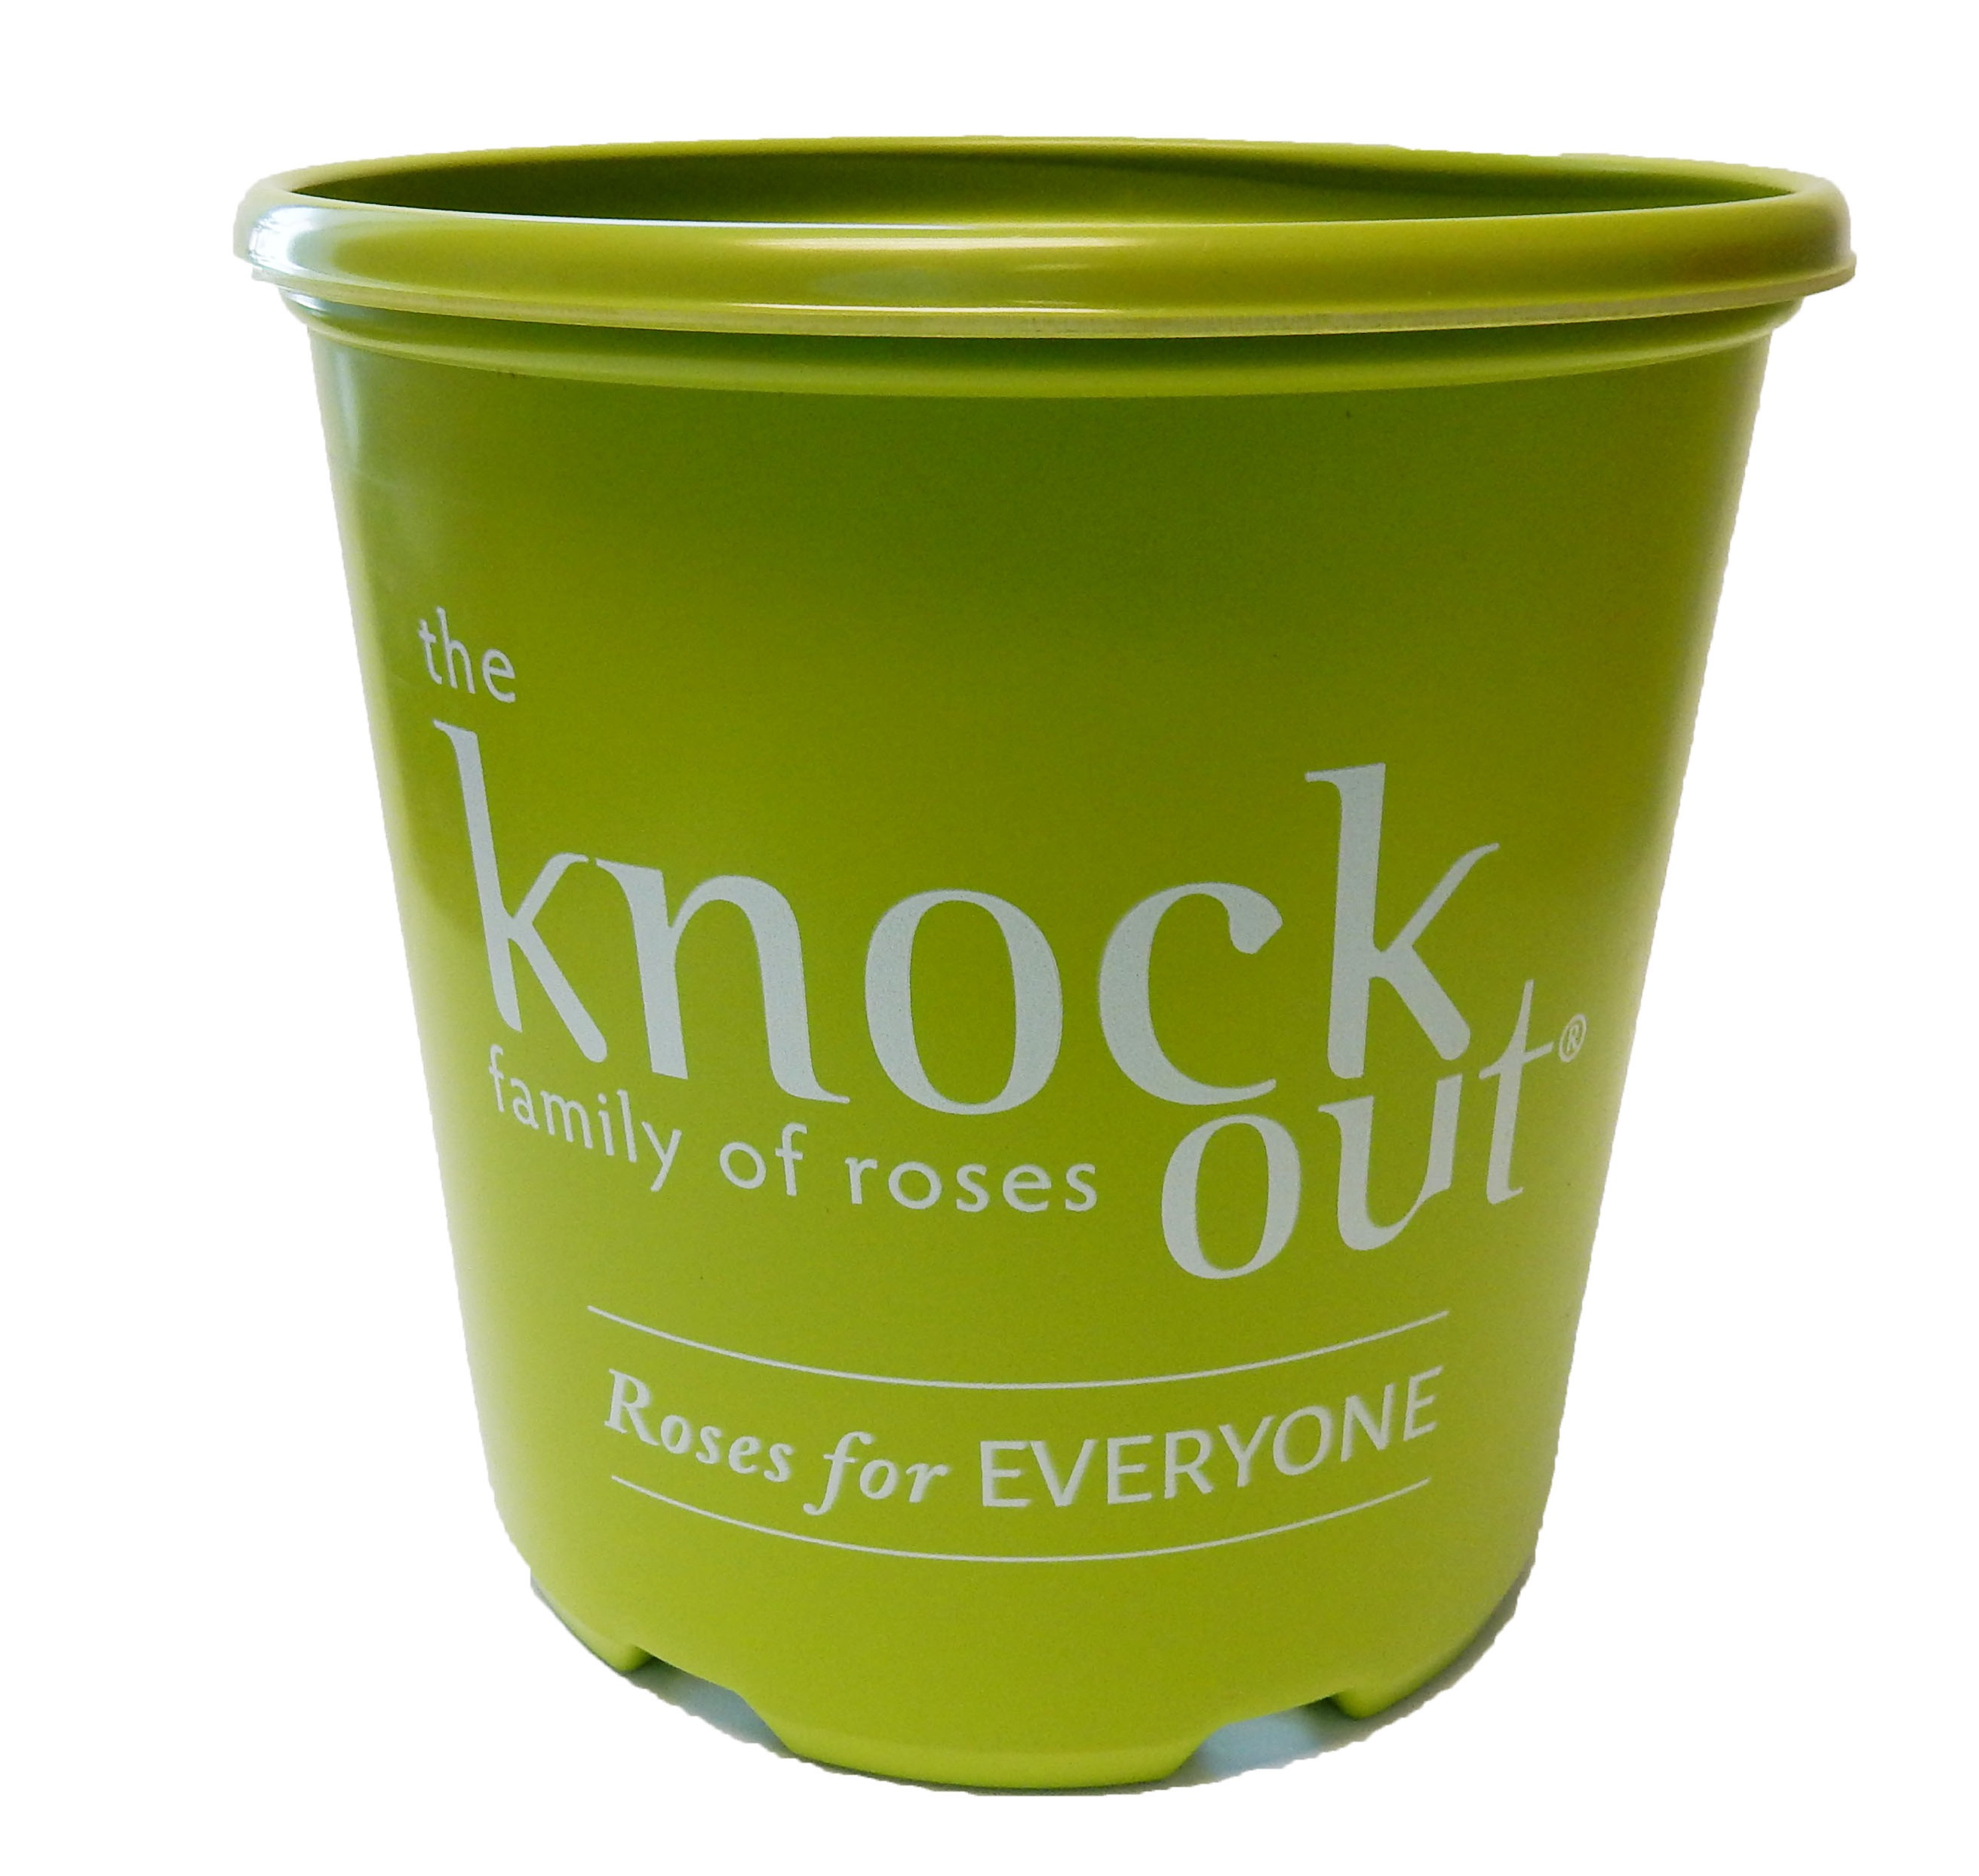 3.00 Gallon Knockout Rose Thermoformed Nursery Pot - 44 per case - Grower